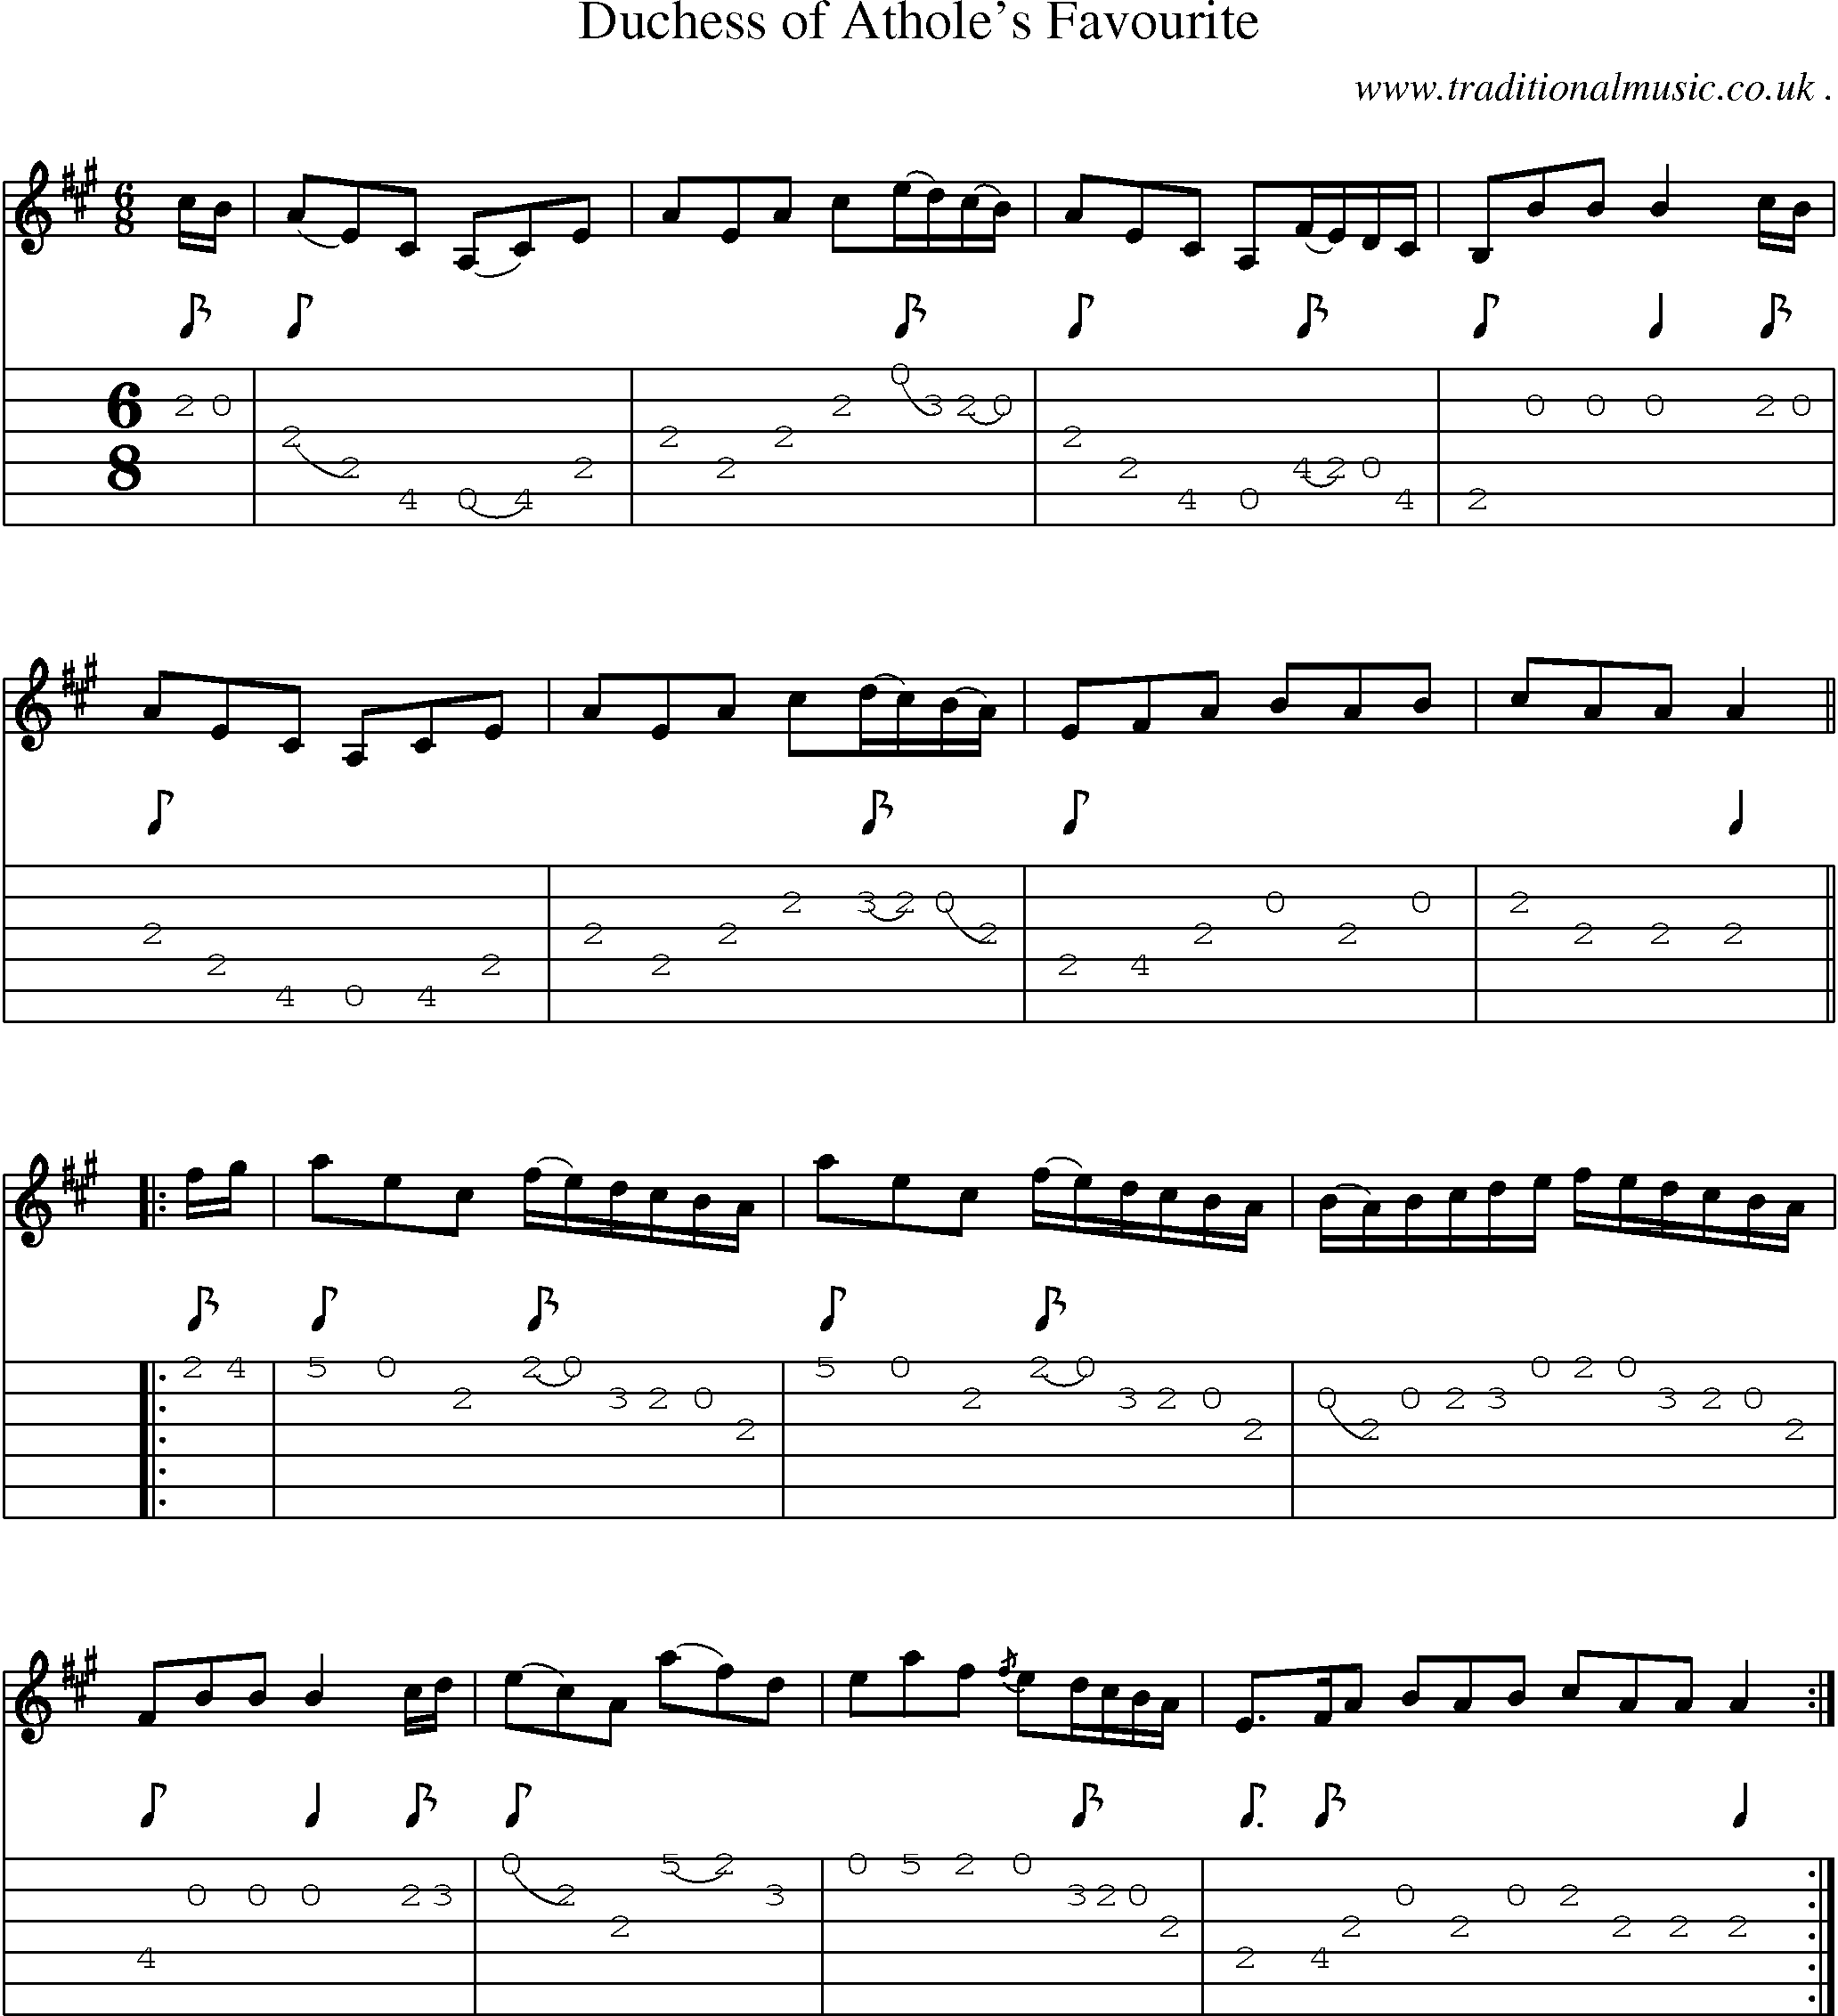 Sheet-music  score, Chords and Guitar Tabs for Duchess Of Atholes Favourite